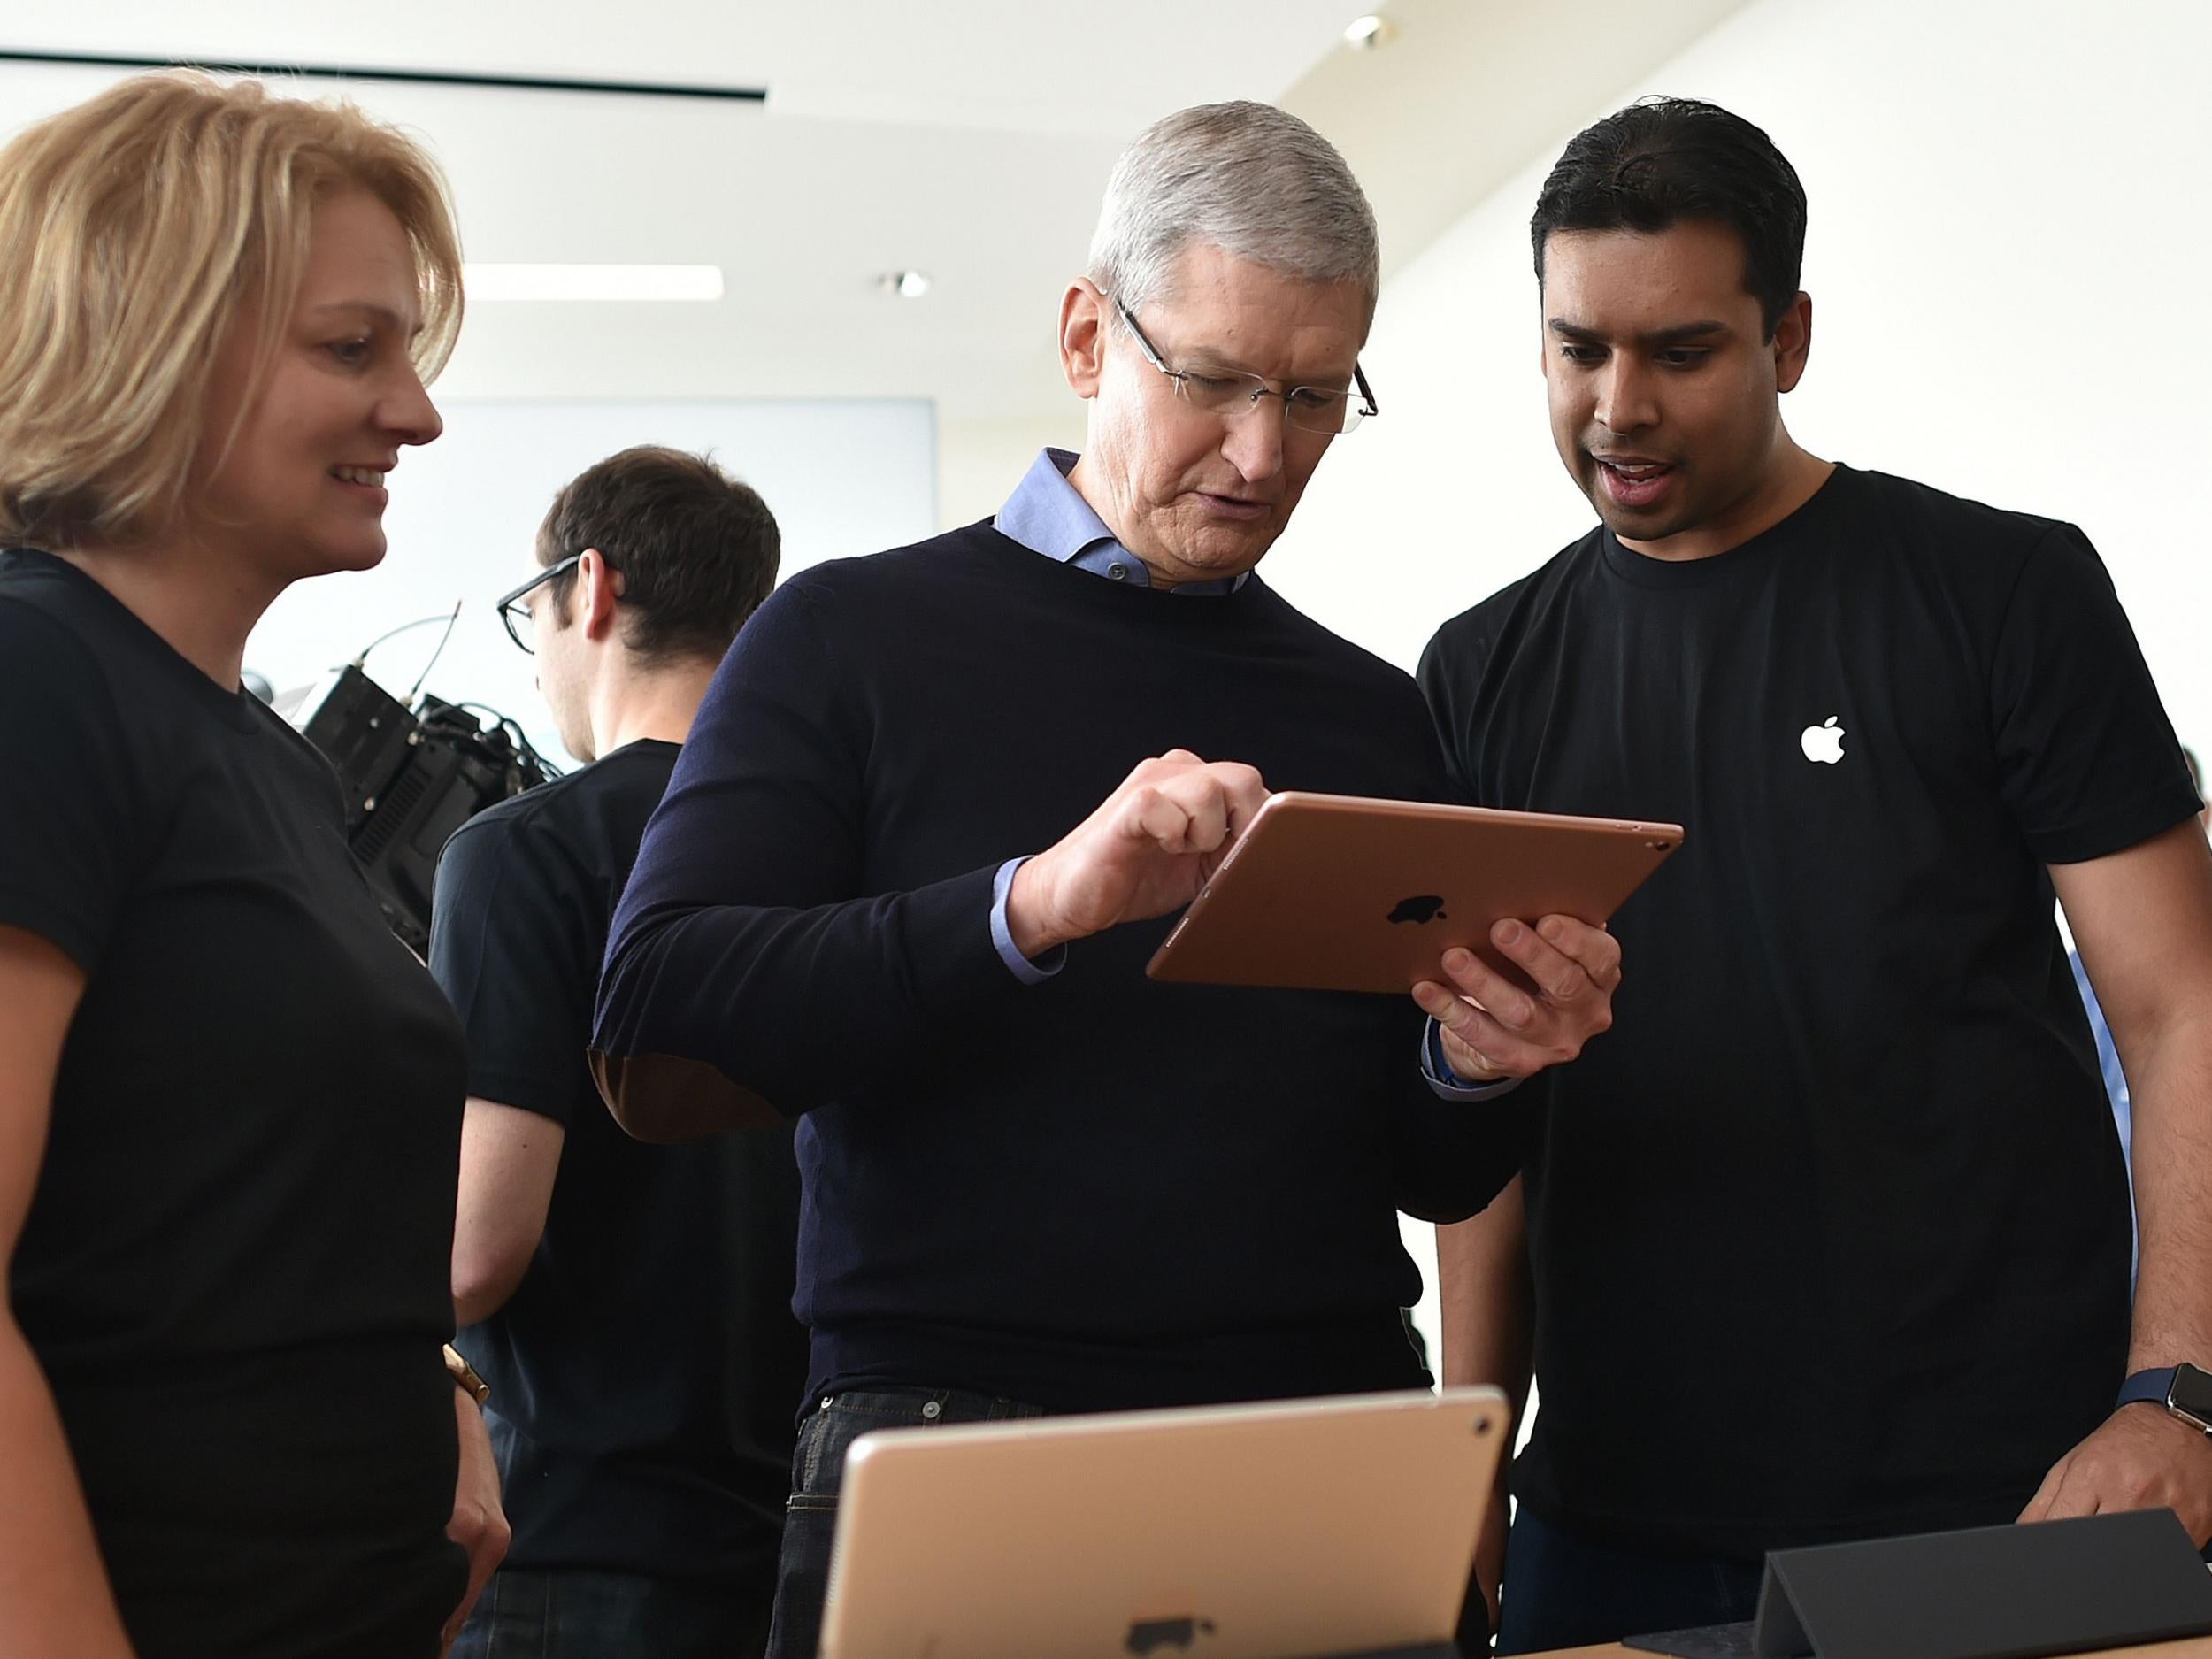 Apple CEO Tim Cook (C) uses a new iPad Pro during a media event at Apple headquarters in Cupertino, California